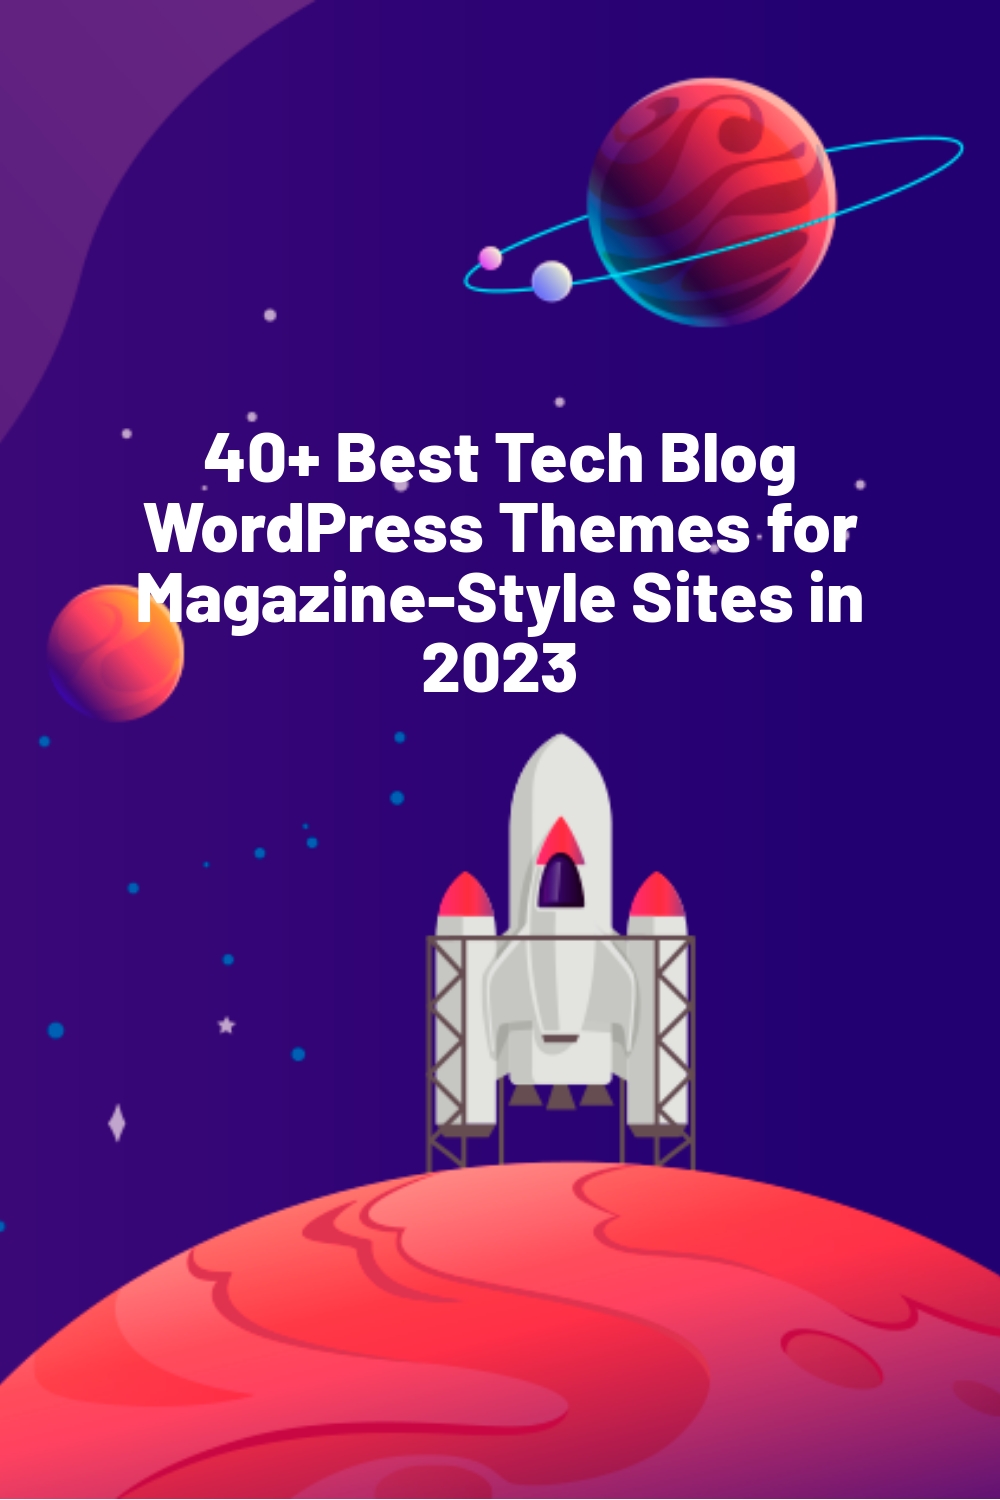 40+ Best Tech Blog WordPress Themes for Magazine-Style Sites in 2023